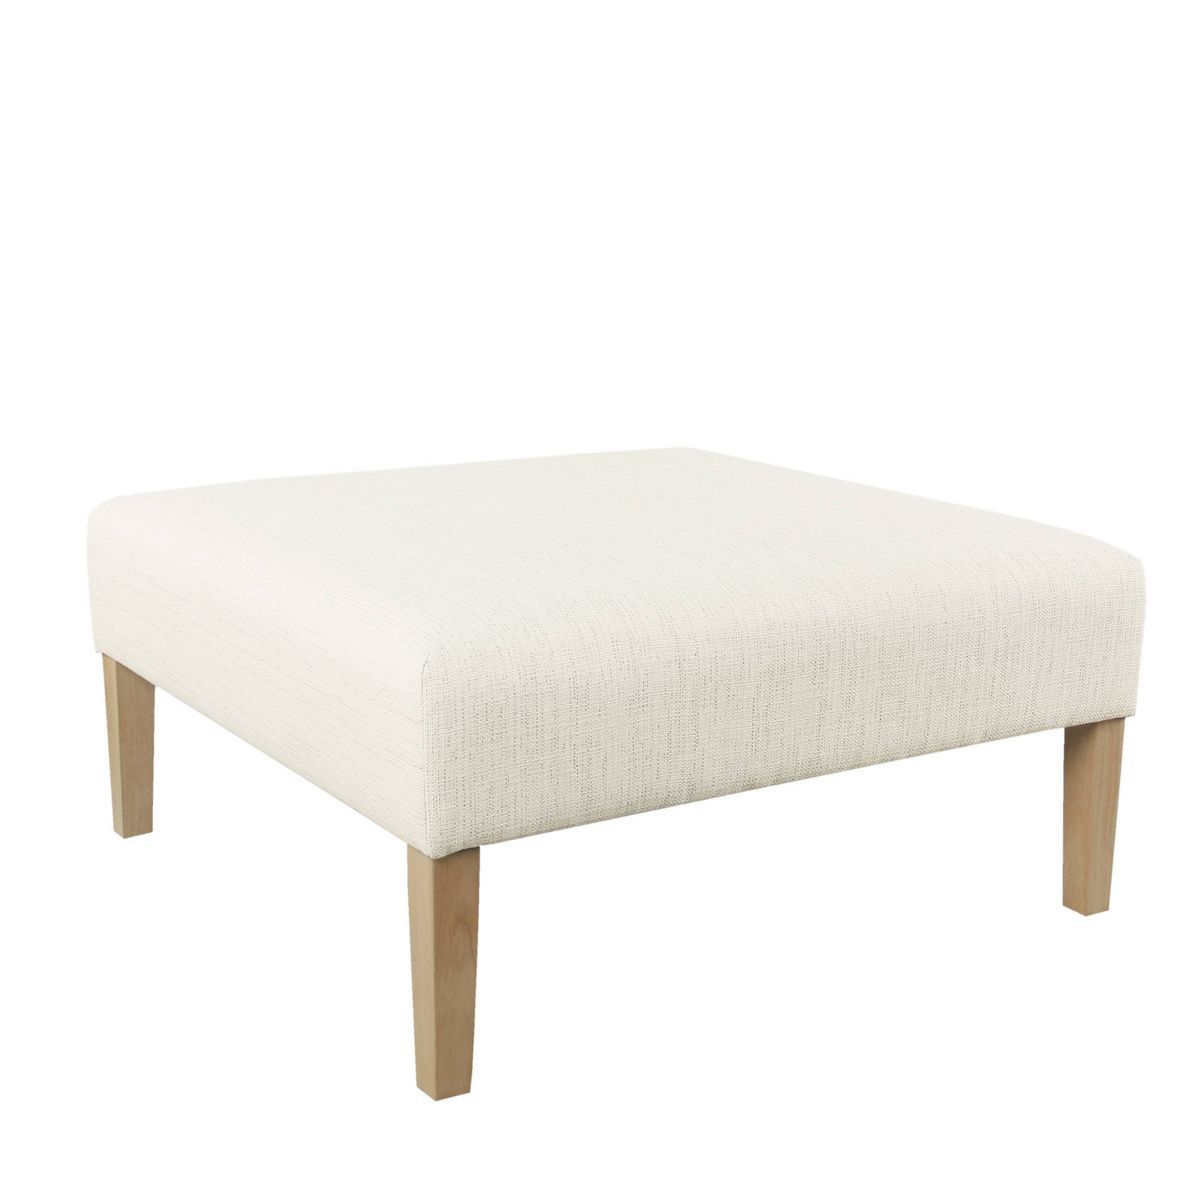 Square Coffee Table Ottoman - HomePop | Target